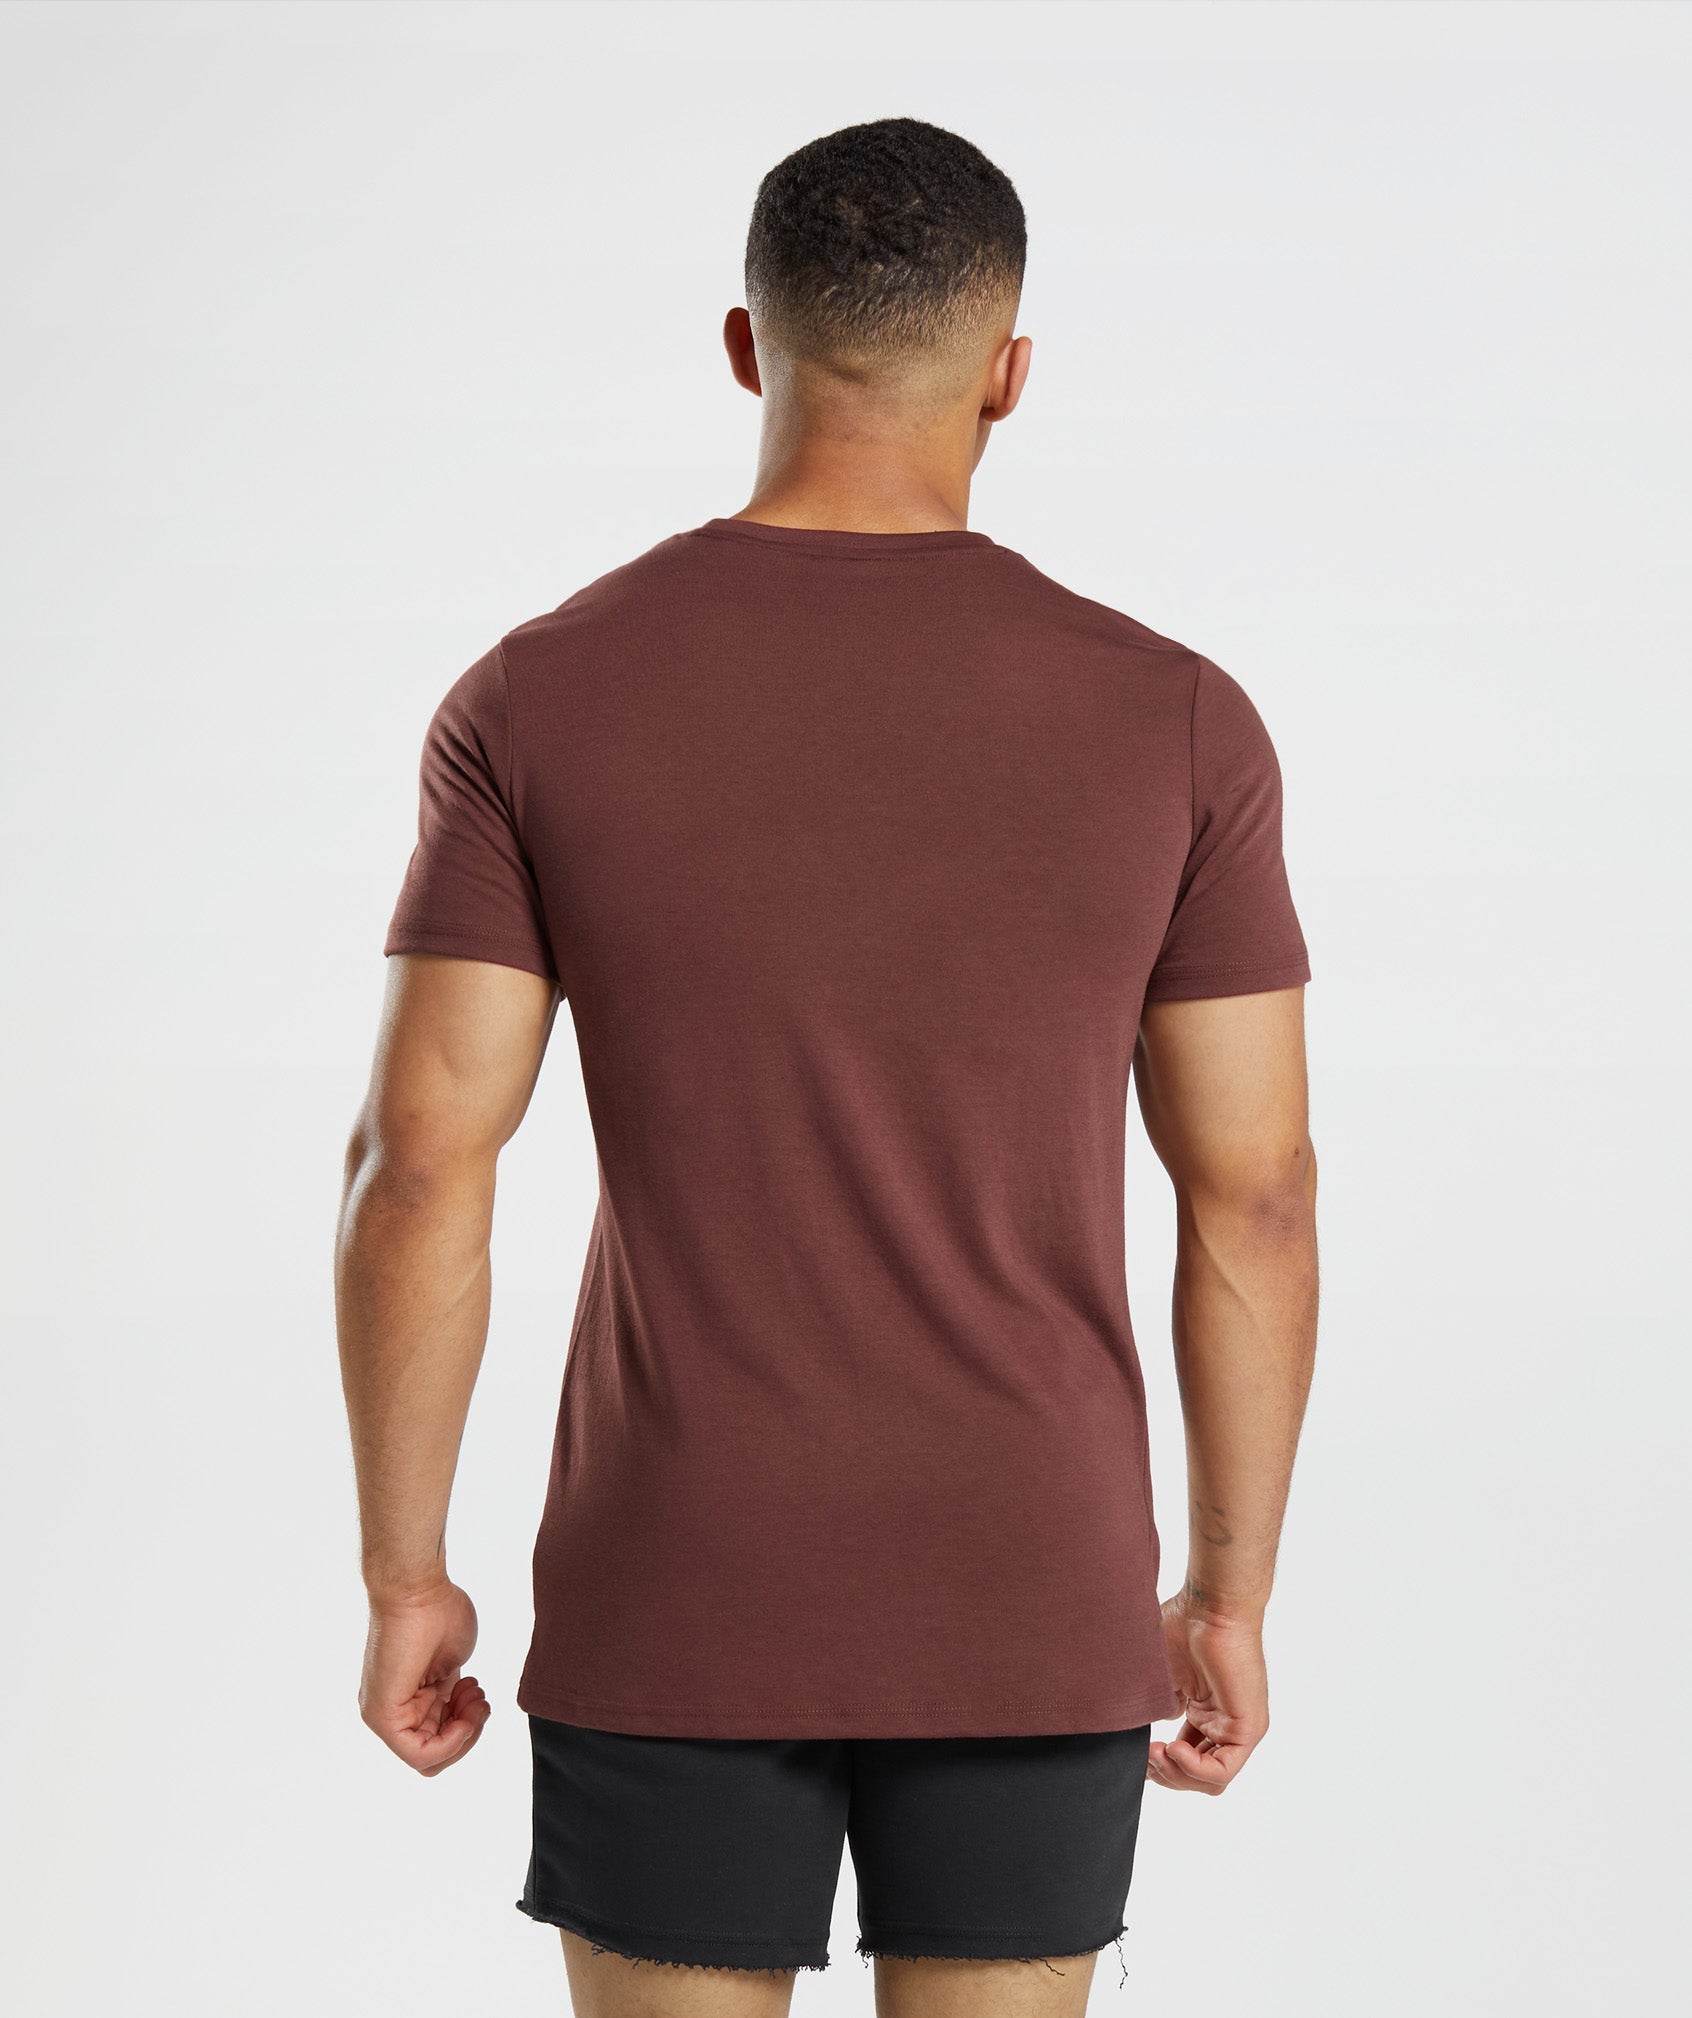 Legacy T-Shirt in Cherry Brown - view 2